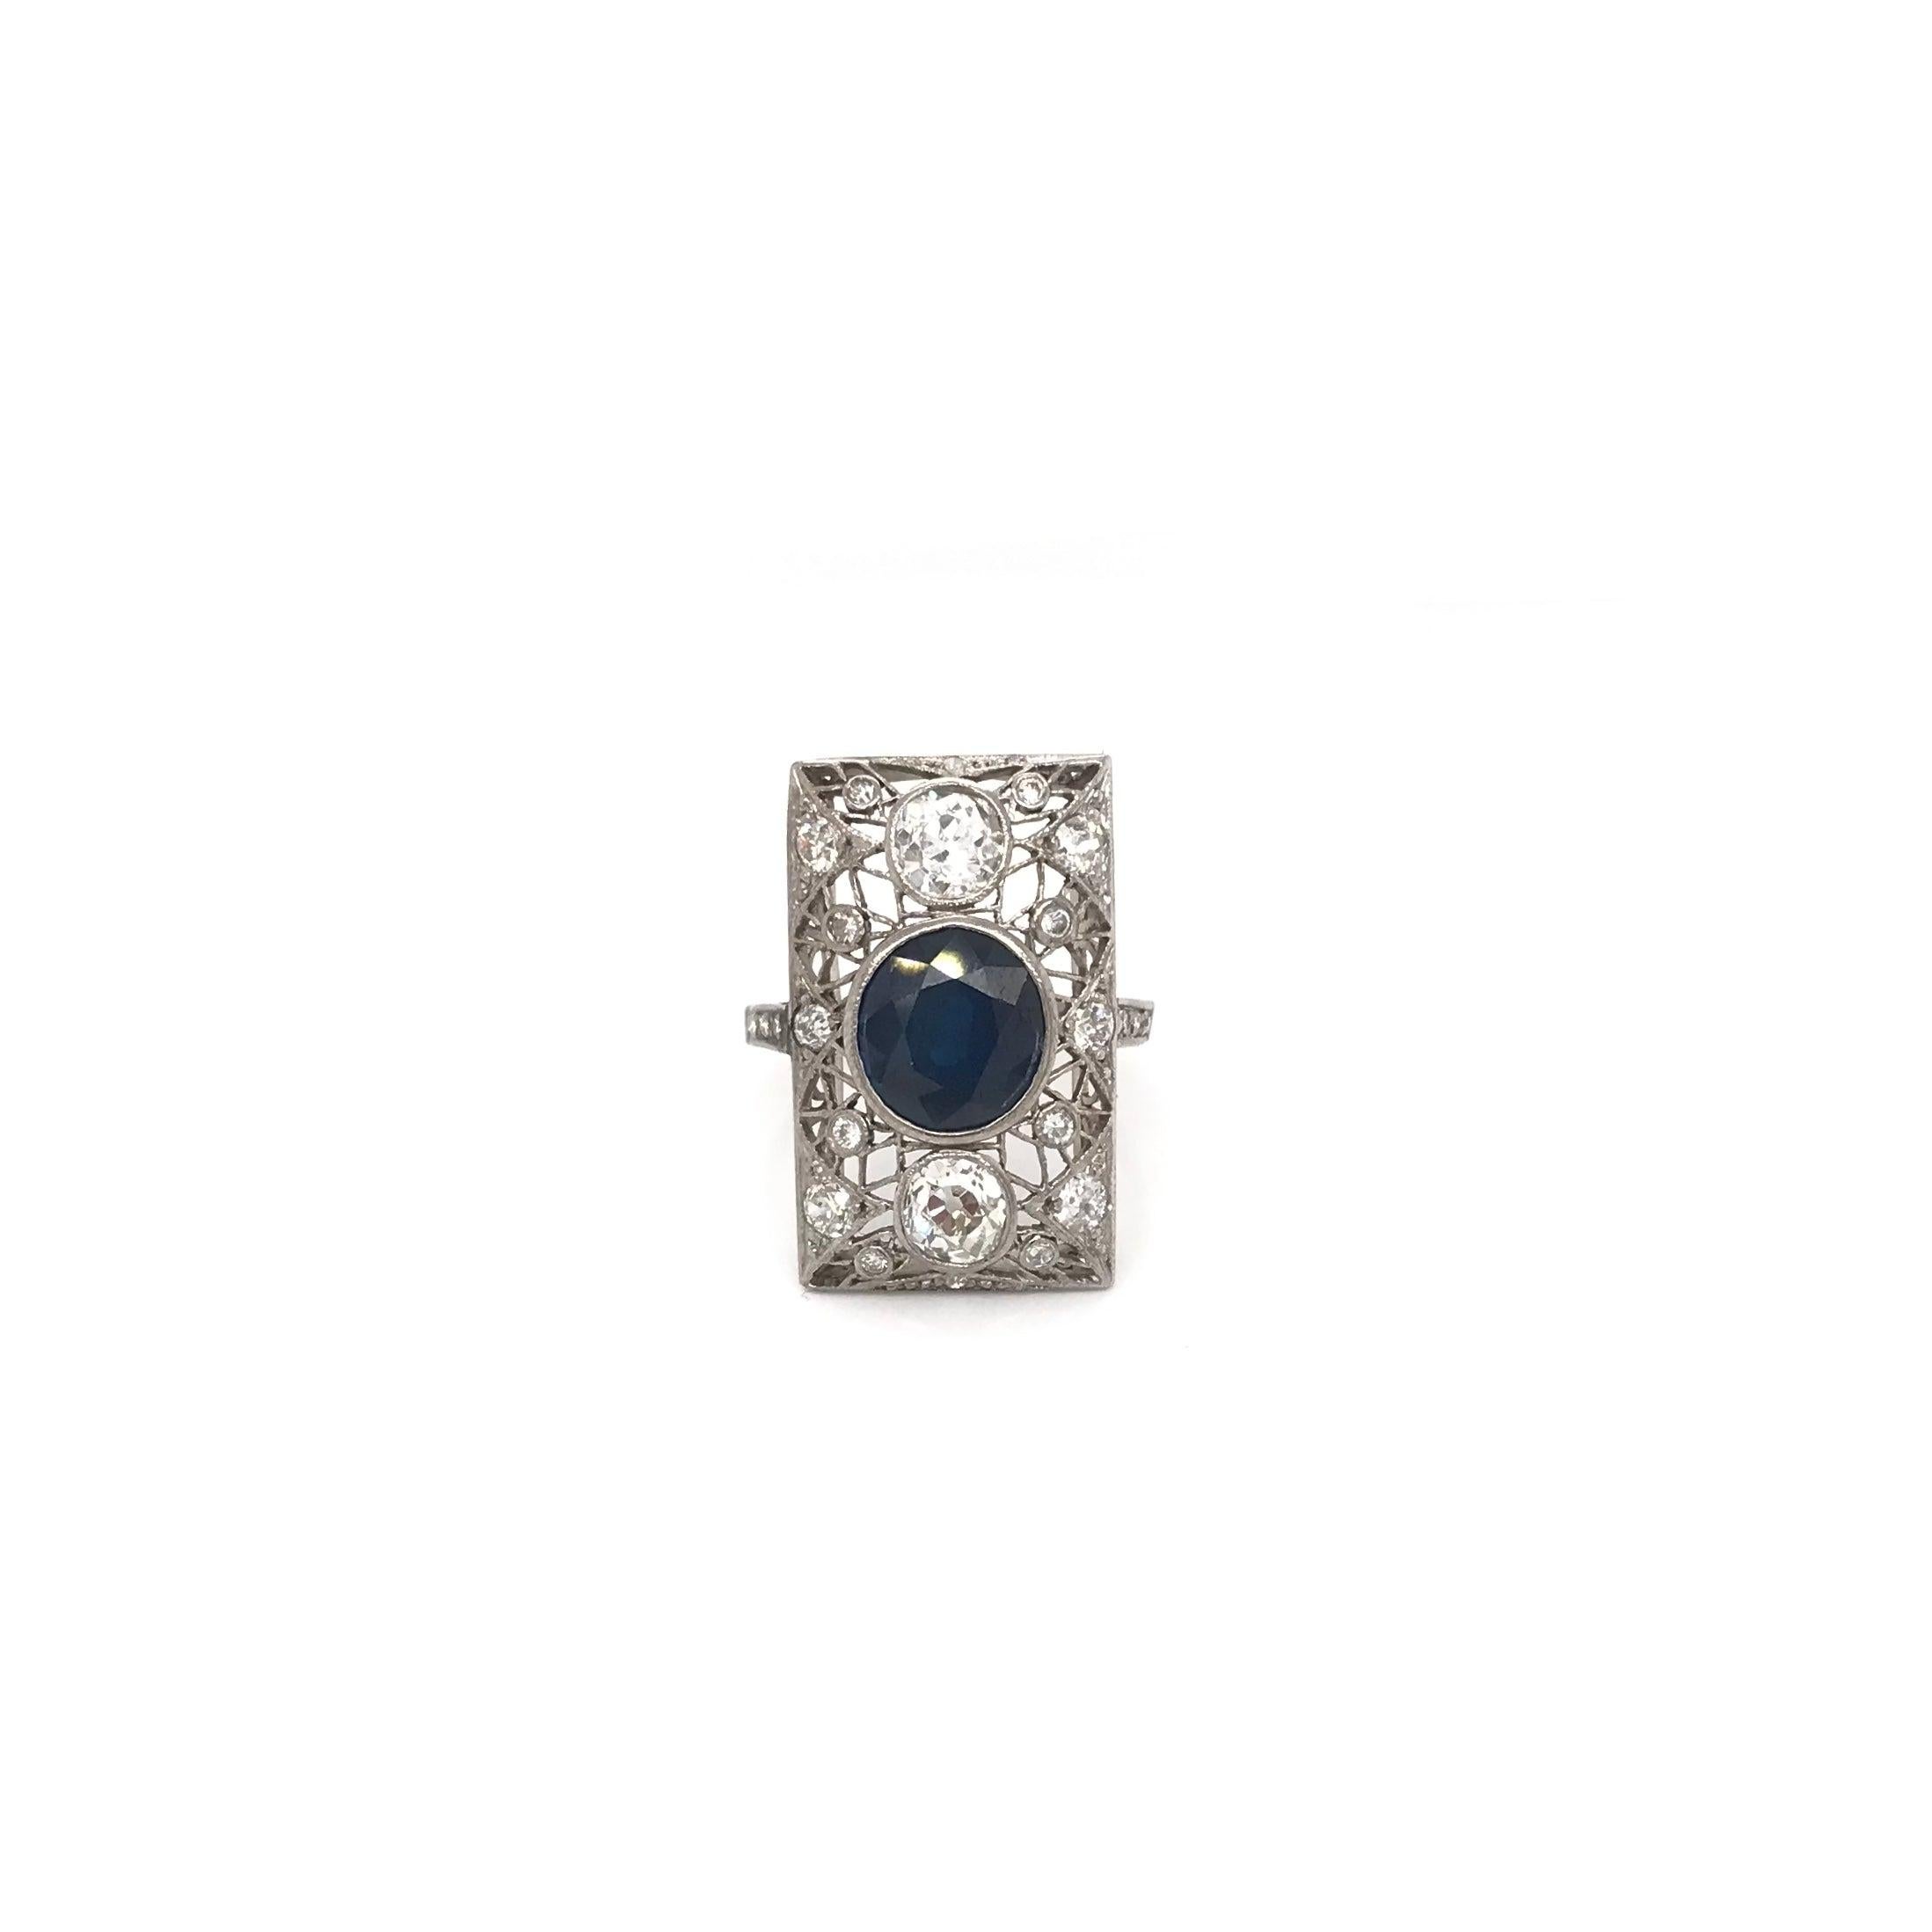 This antique piece was handcrafted sometime during the Art Deco design period (1920-1940). The center stone is a gorgeously rich blue sapphire. The central blue sapphire measures approximately 3 full carats. The platinum setting features one diamond